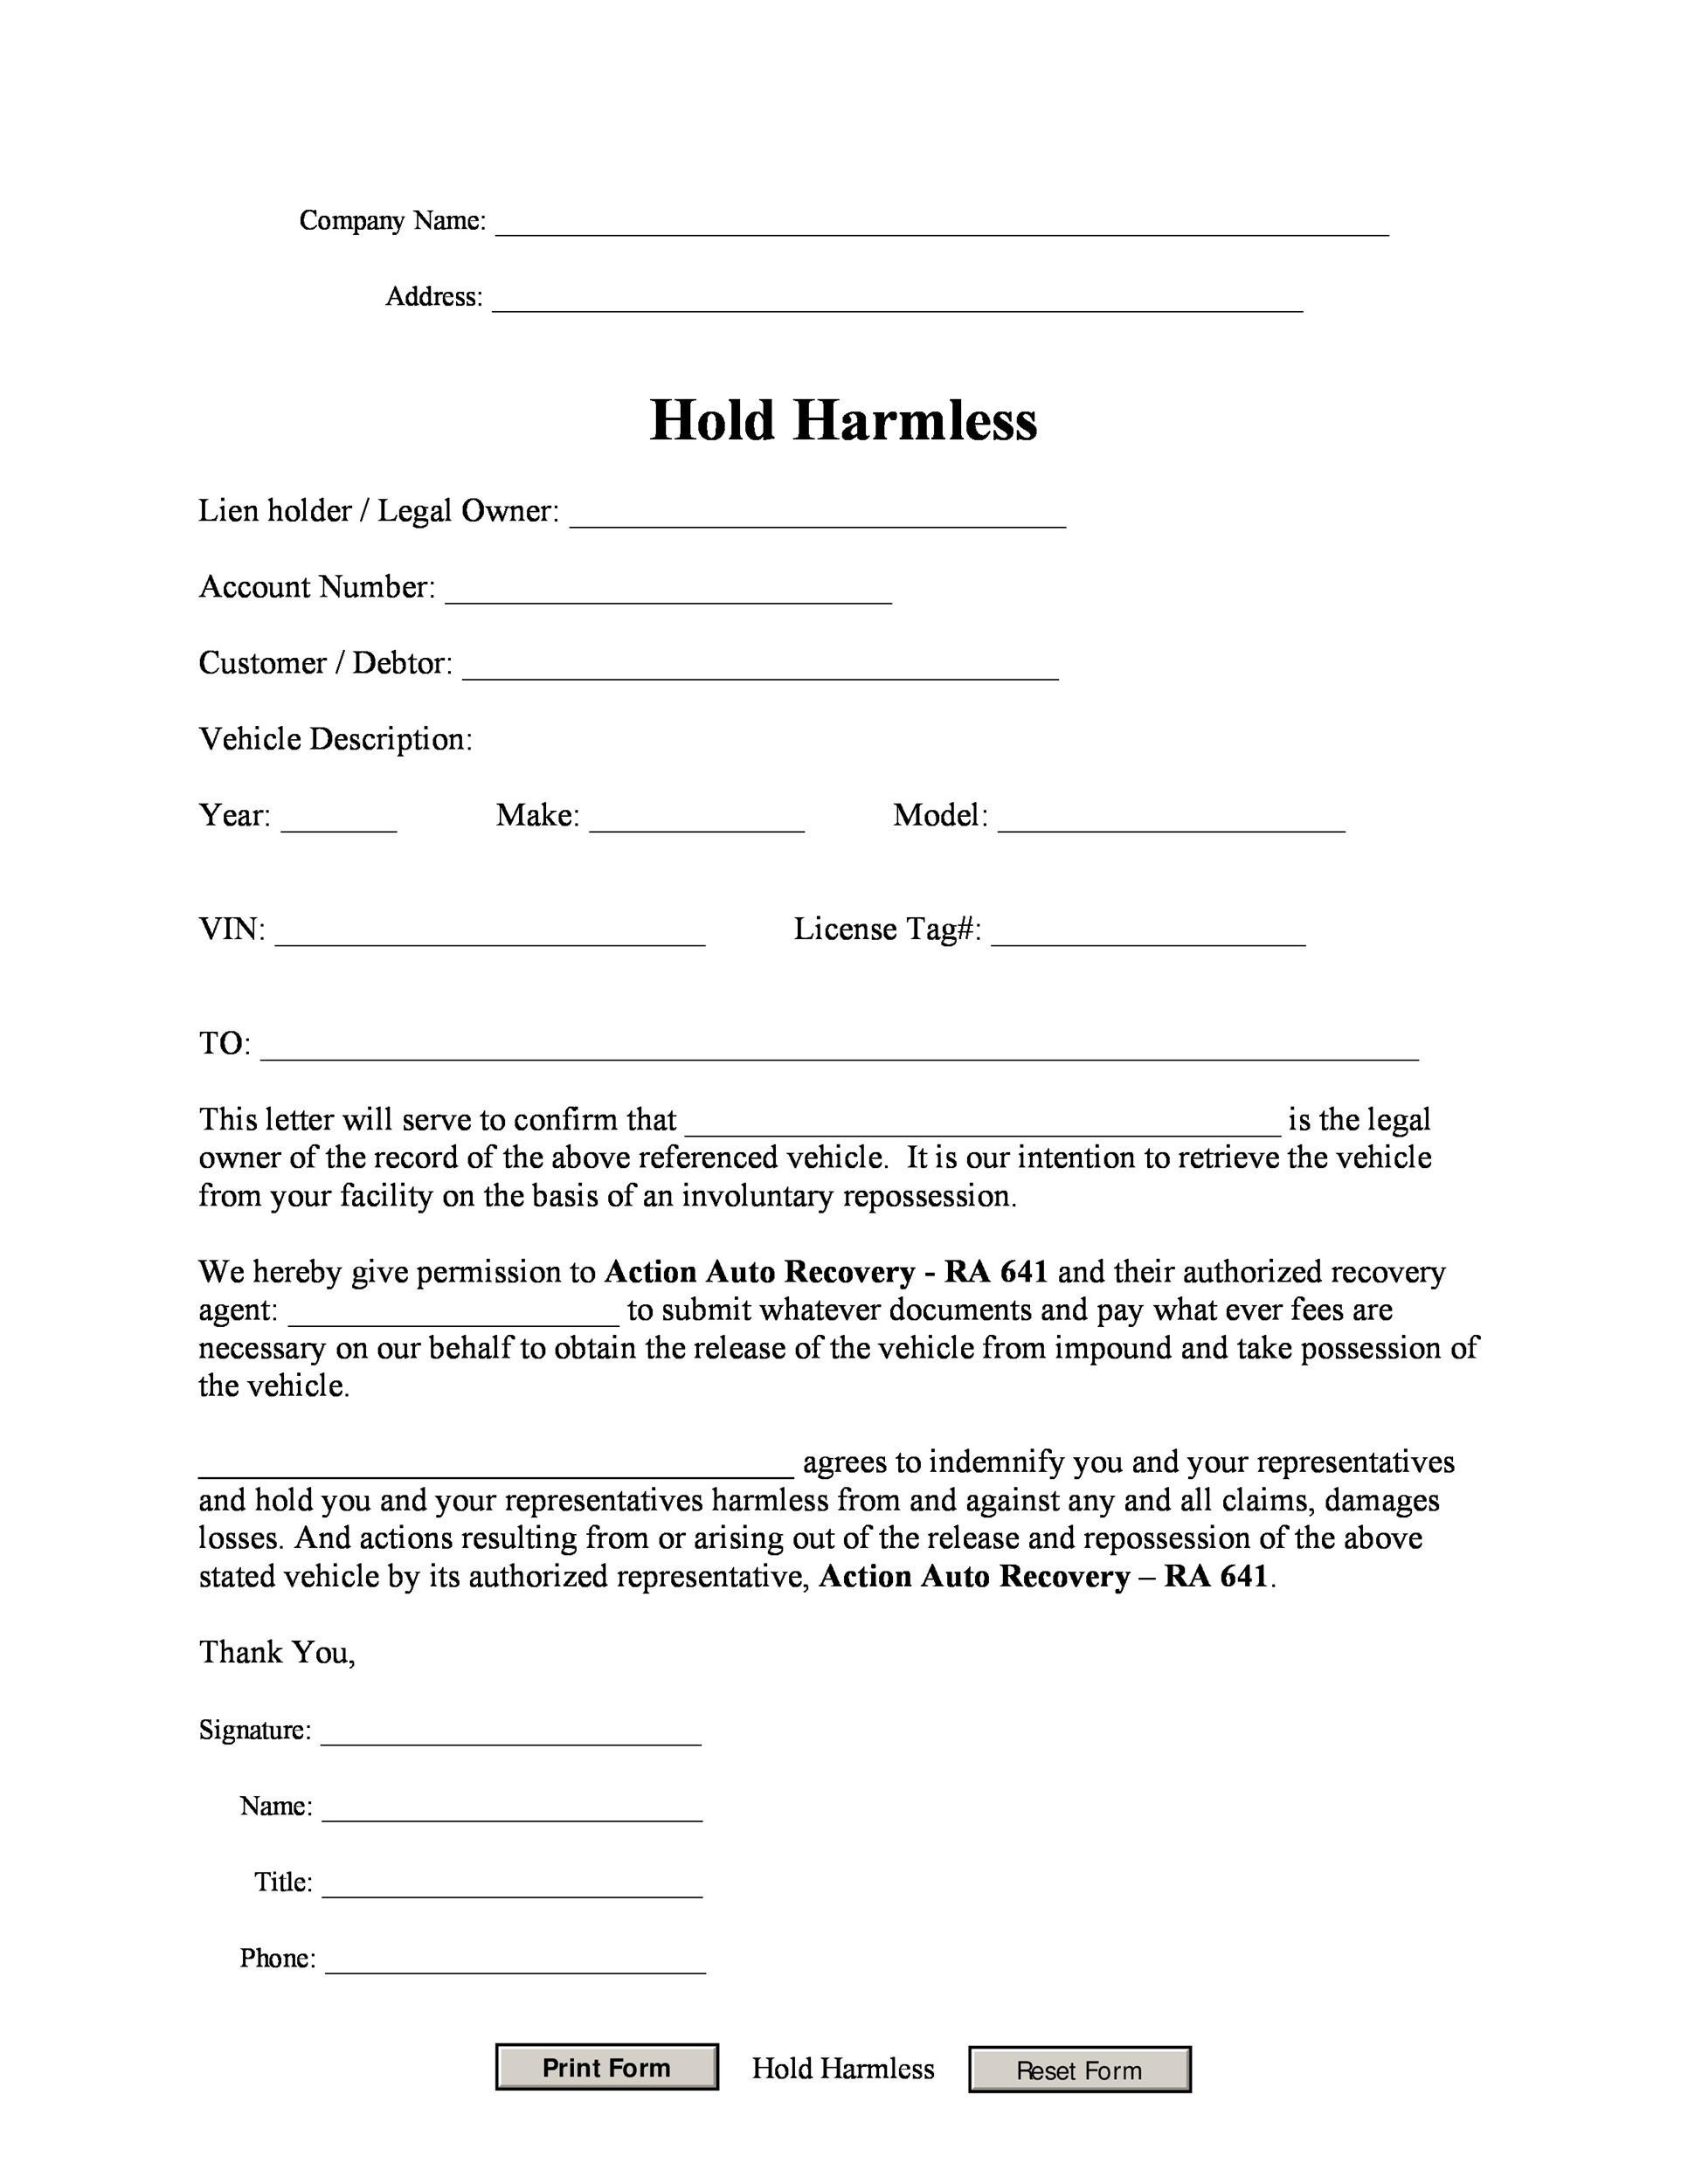 Free Hold Harmless Agreement Template Word